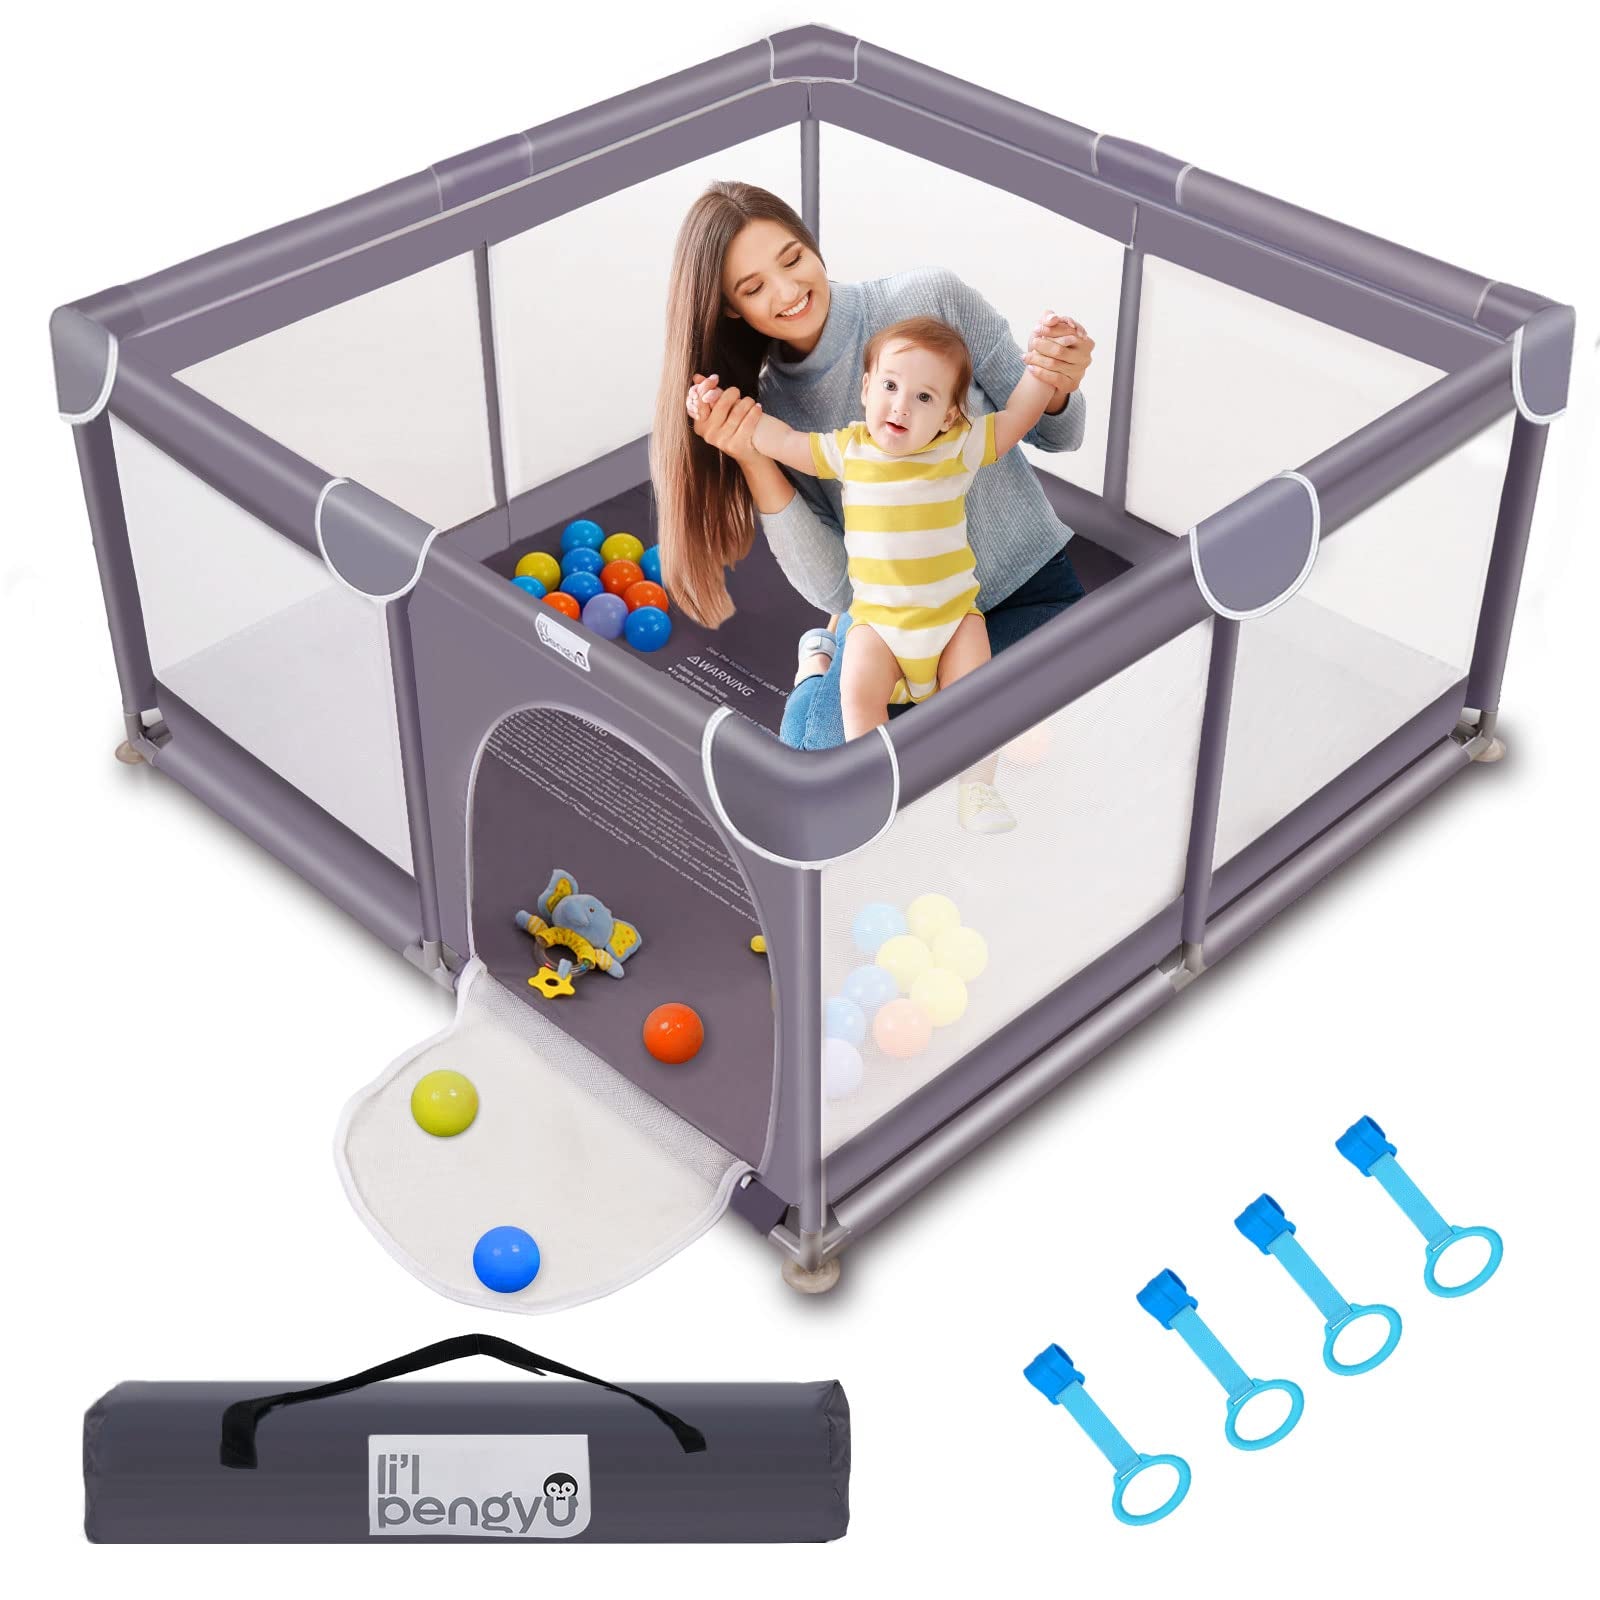 Baby  Li'l Pengyu Store playpen for Babies and Toddlers, 50 x 50 inch